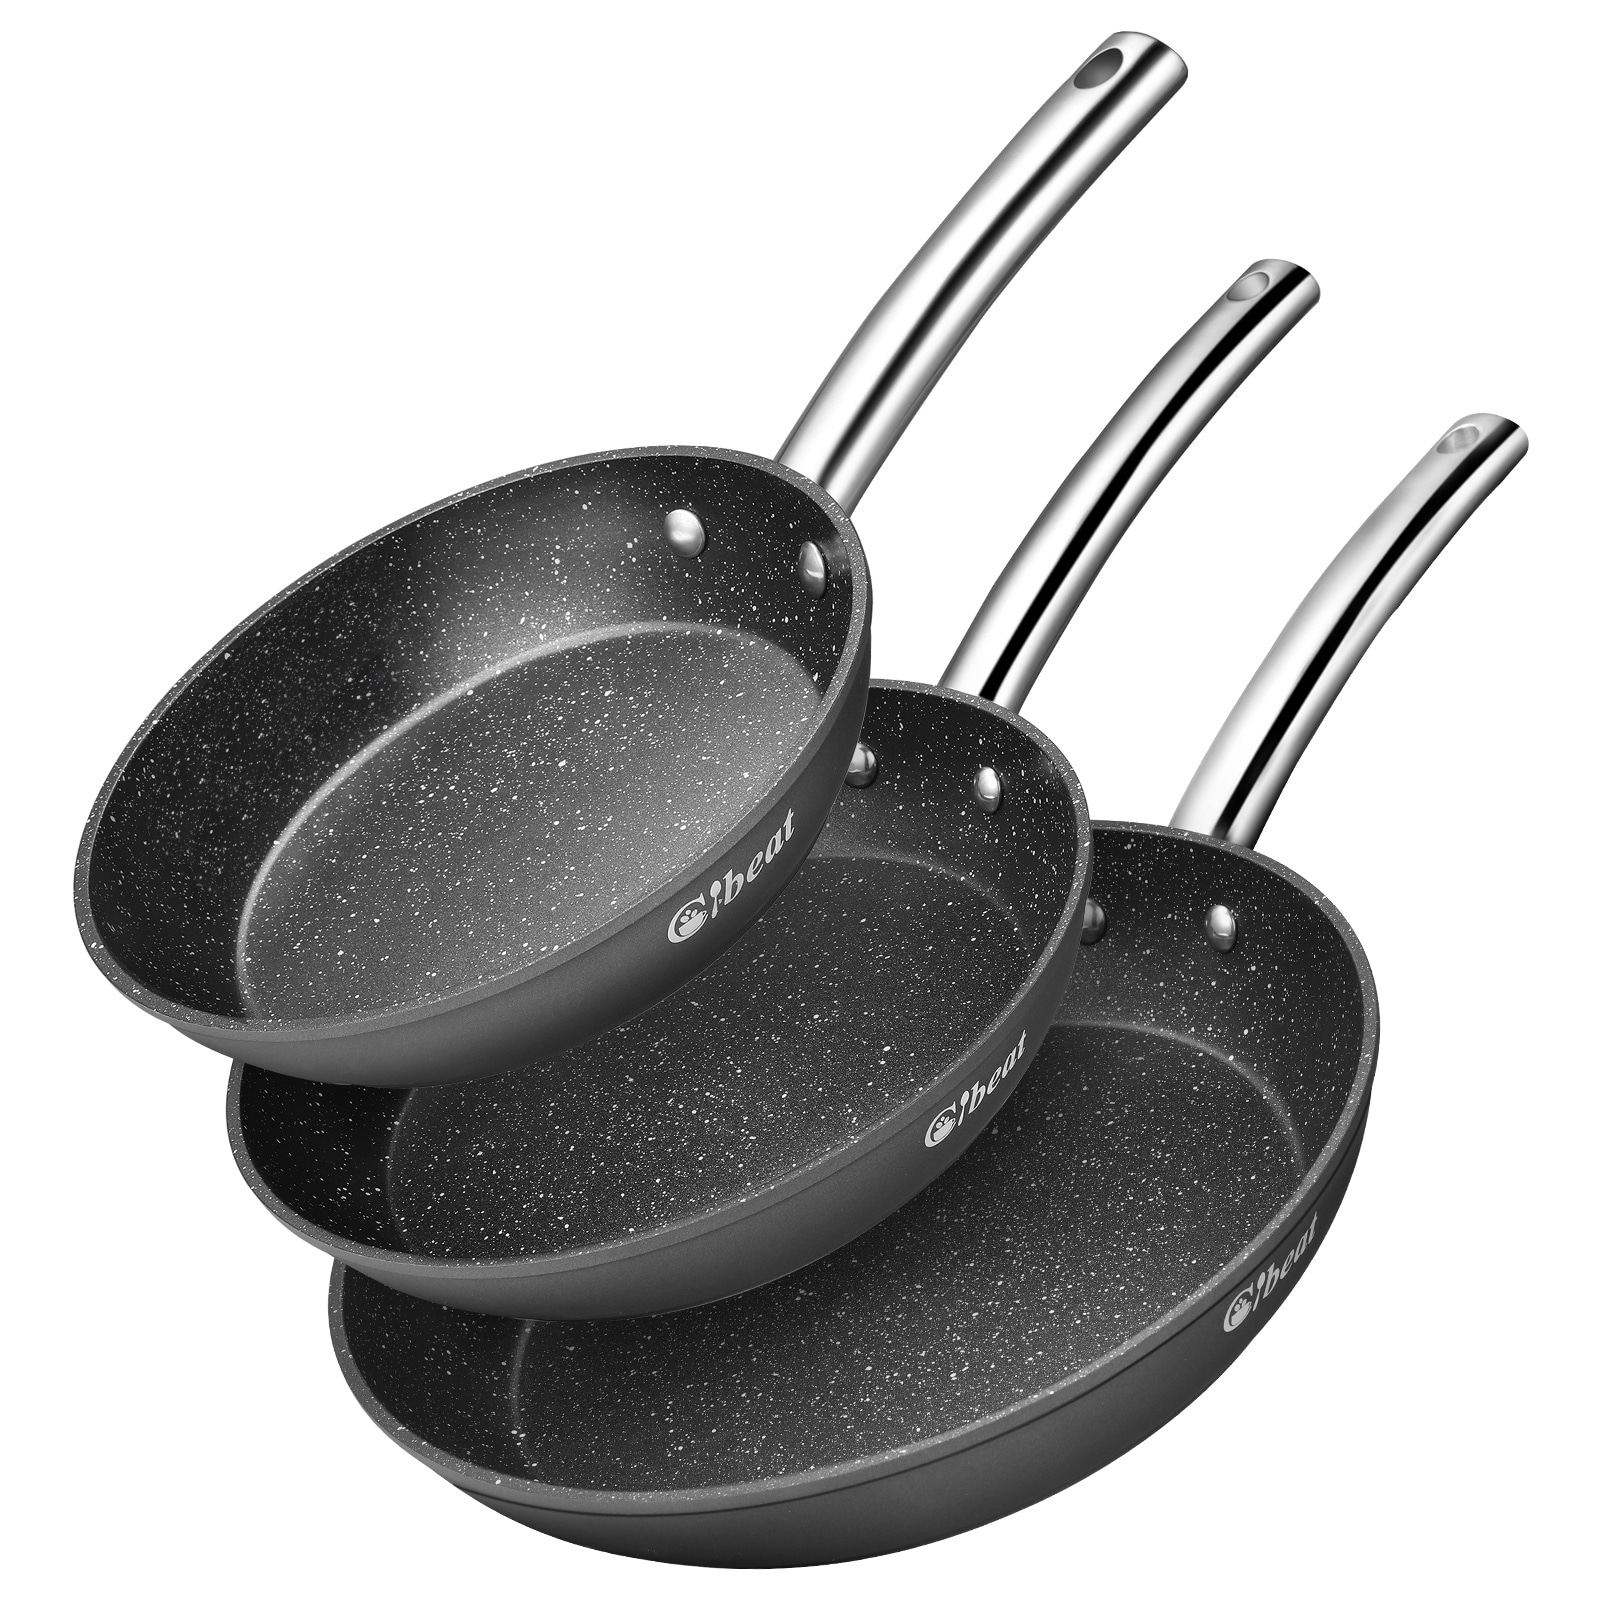 Anolon Ascend Hard Anodized Nonstick Frying Pan, 12-Inch